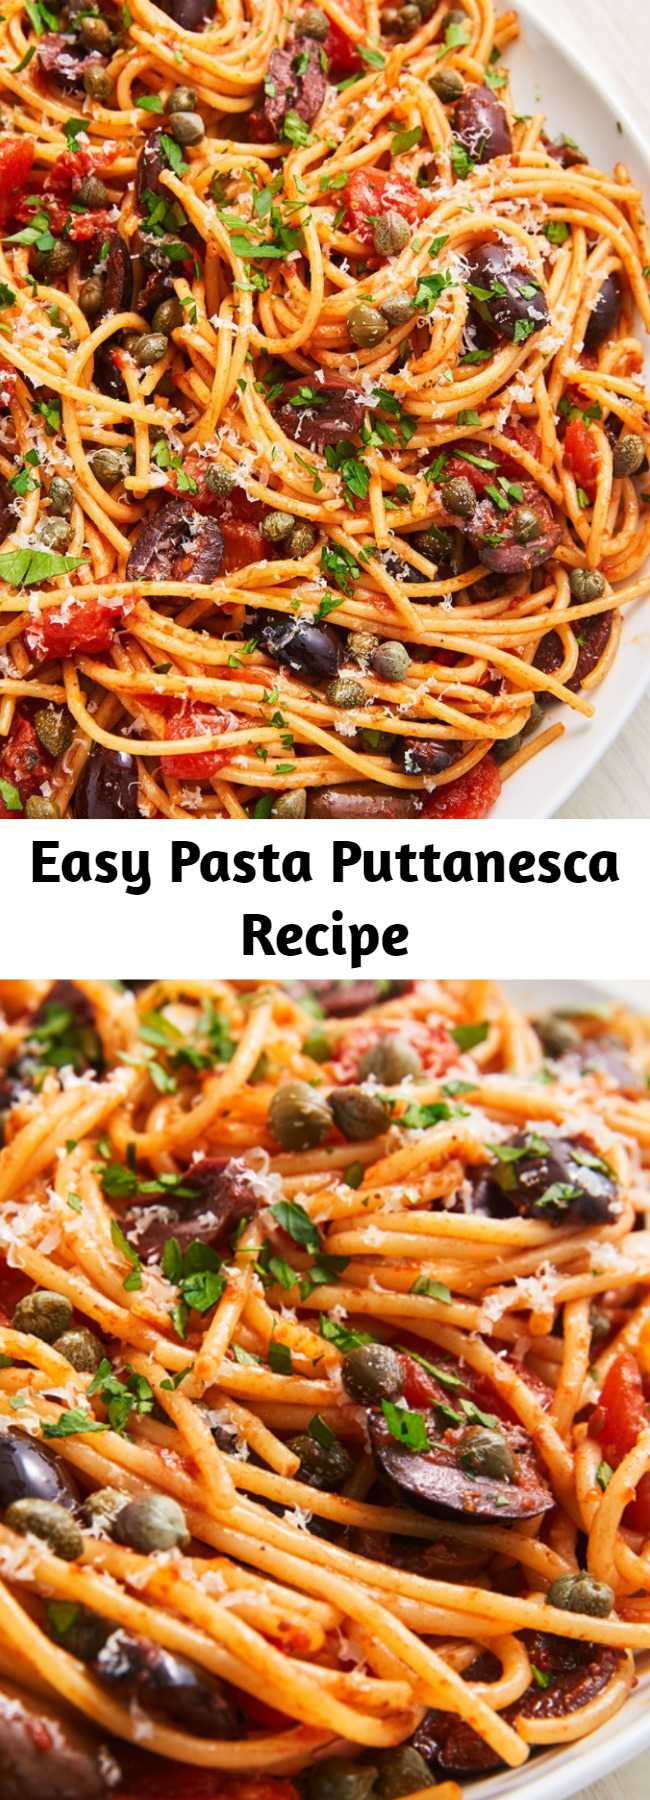 Easy Pasta Puttanesca Recipe - With an extremely fragrant sauce, this pasta is to die for. Bursting with flavor and so easy to prepare, you'll be craving this pasta every week. Don't shy away from the magic of anchovy in this Pasta Puttanesca.